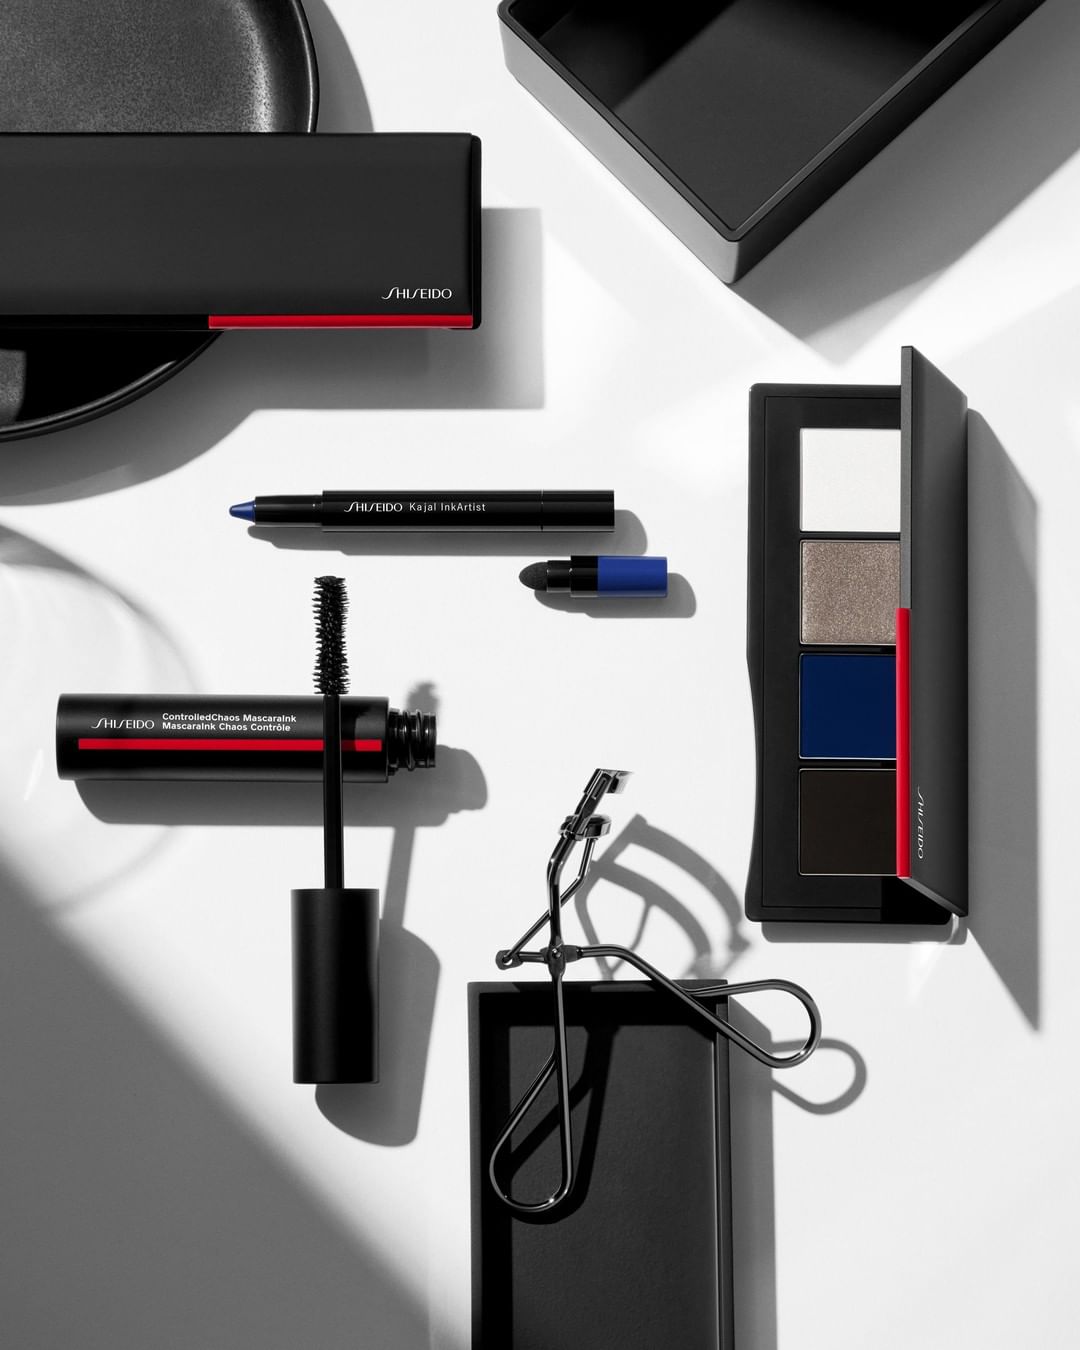 SHISEIDO - The eyes have it. Dress up lids and lashes when the lights go down using our iconic Eyelash Curler, Essentialist Eye Palette in Kaigan Street Waters, Kajal InkArtist in Gunjo Blue, and Cont...